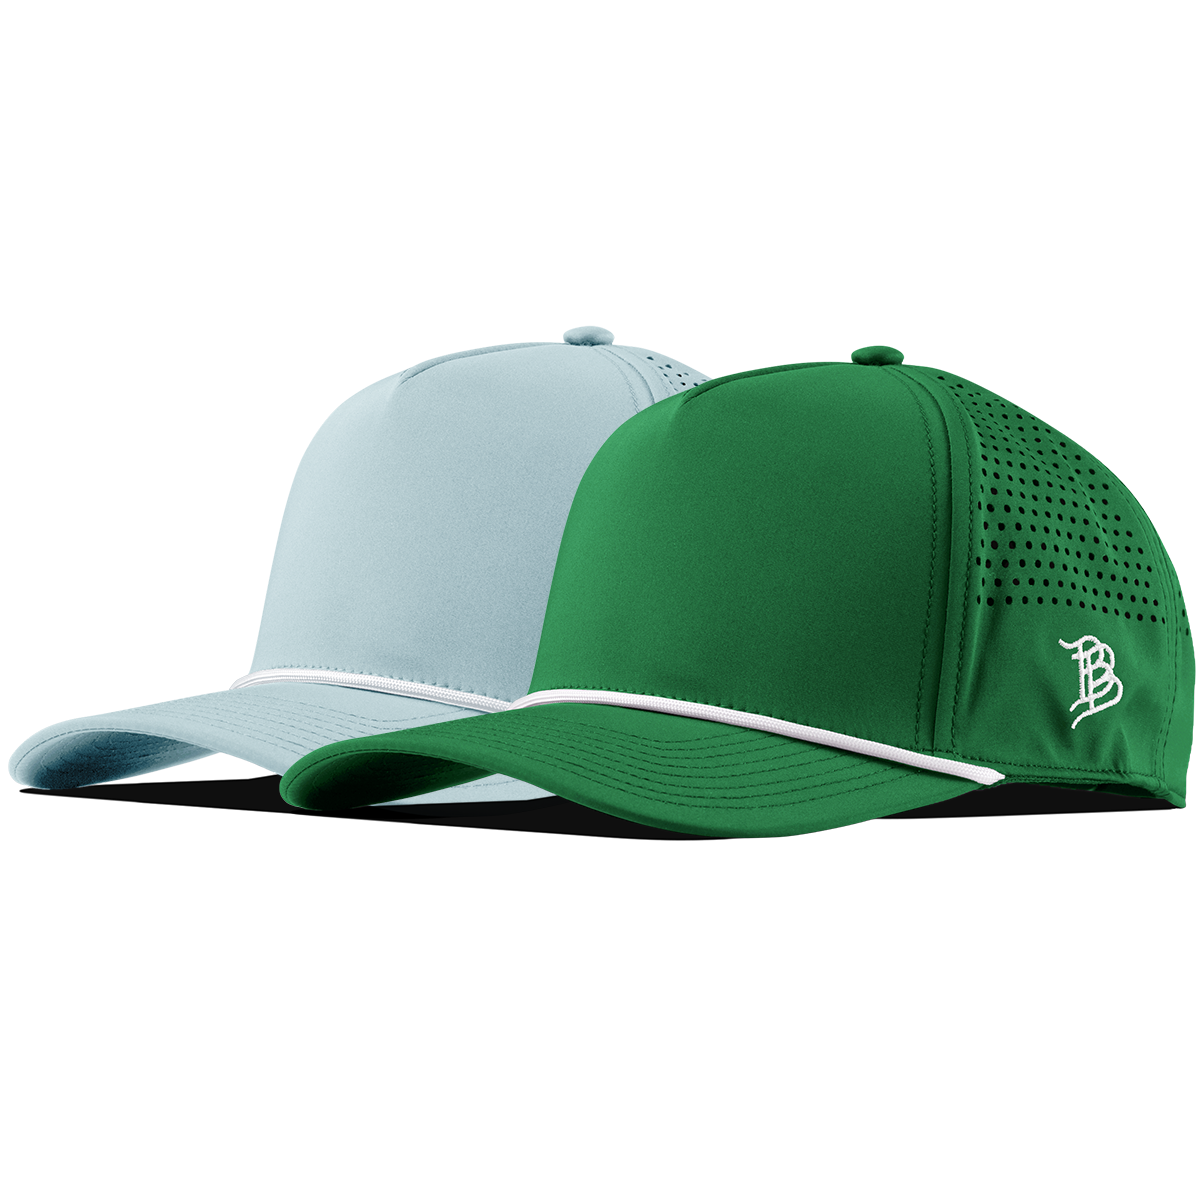 Bare Curved 5 Panel Rope 2-Pack Kelly Green/White + Sky Blue/White